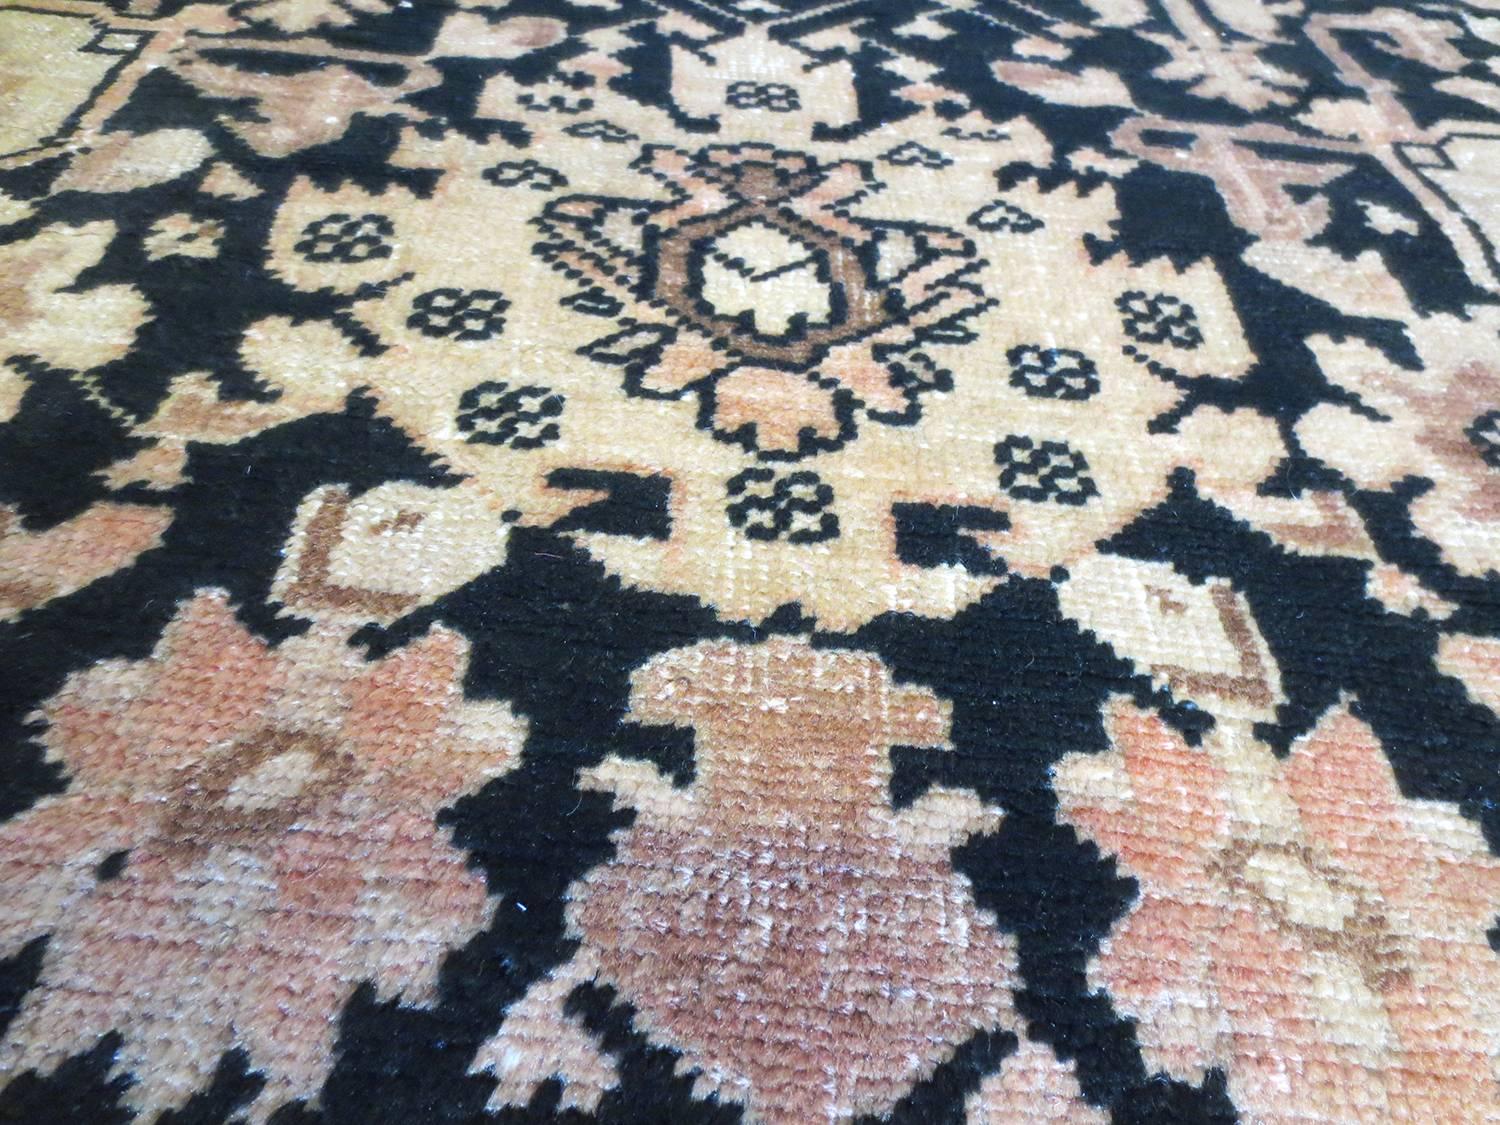 This is an antique Karabagh runner from the Caucasus area circa 1880s. It has a regal display of palmette, floral and angular patterns on dark black field with light peach, ivory, taupe and browns. The darker field is nicely offset by a softer